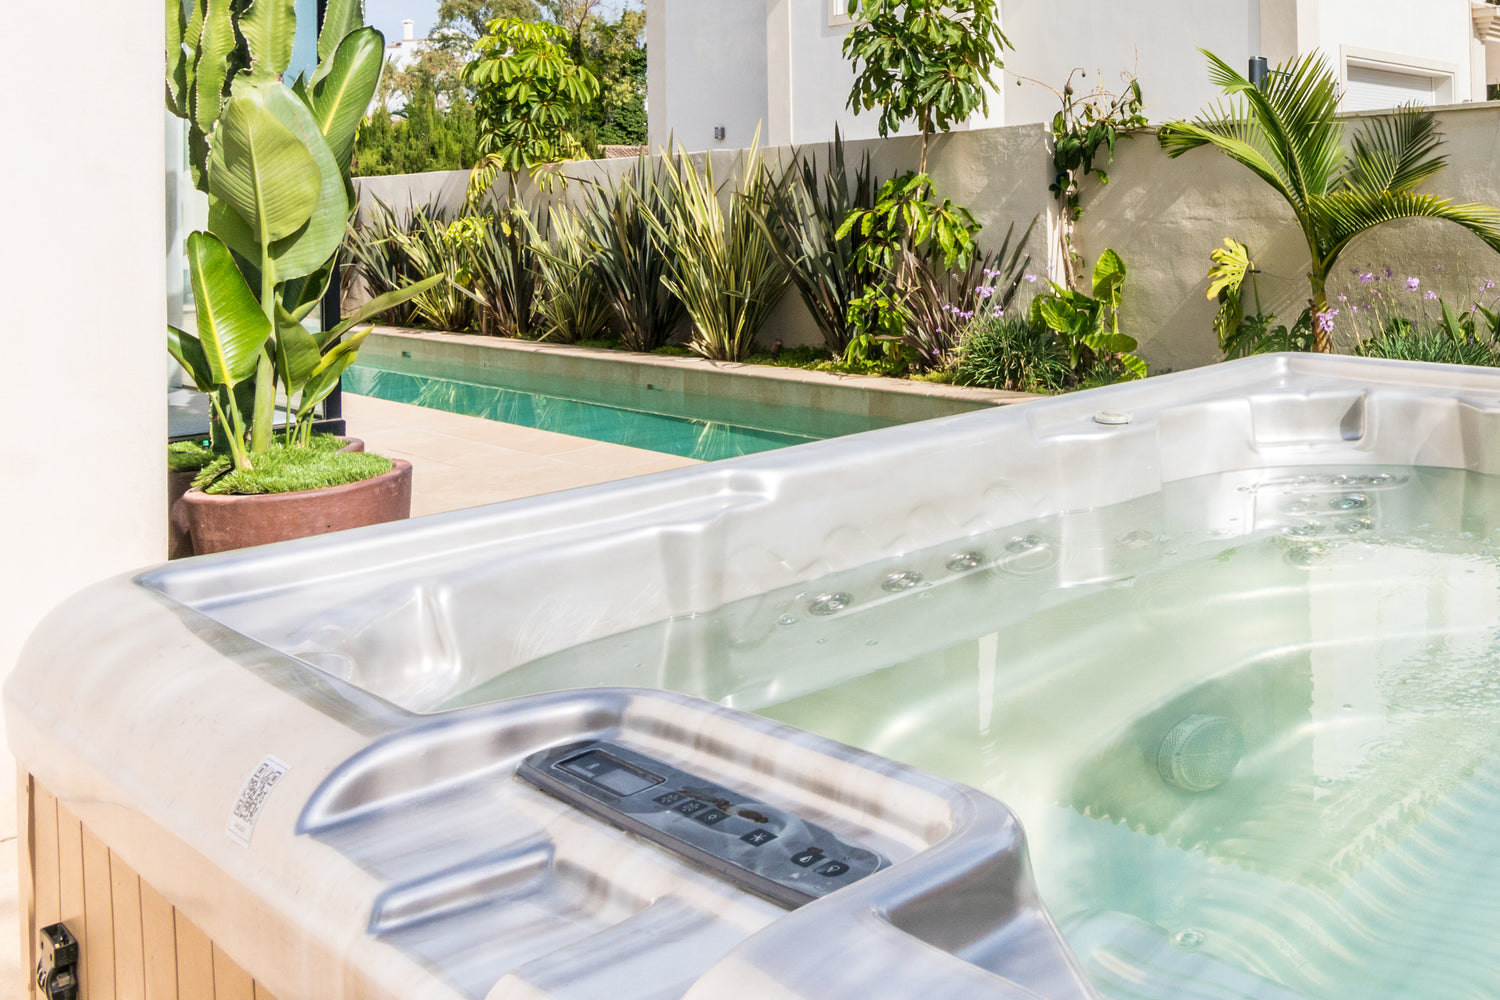 Jacuzzi and pool area of Villa, Marbella luxury Beach House short term rental, located on the beach side at Marbella´s exclusive Golden Mile just by beach